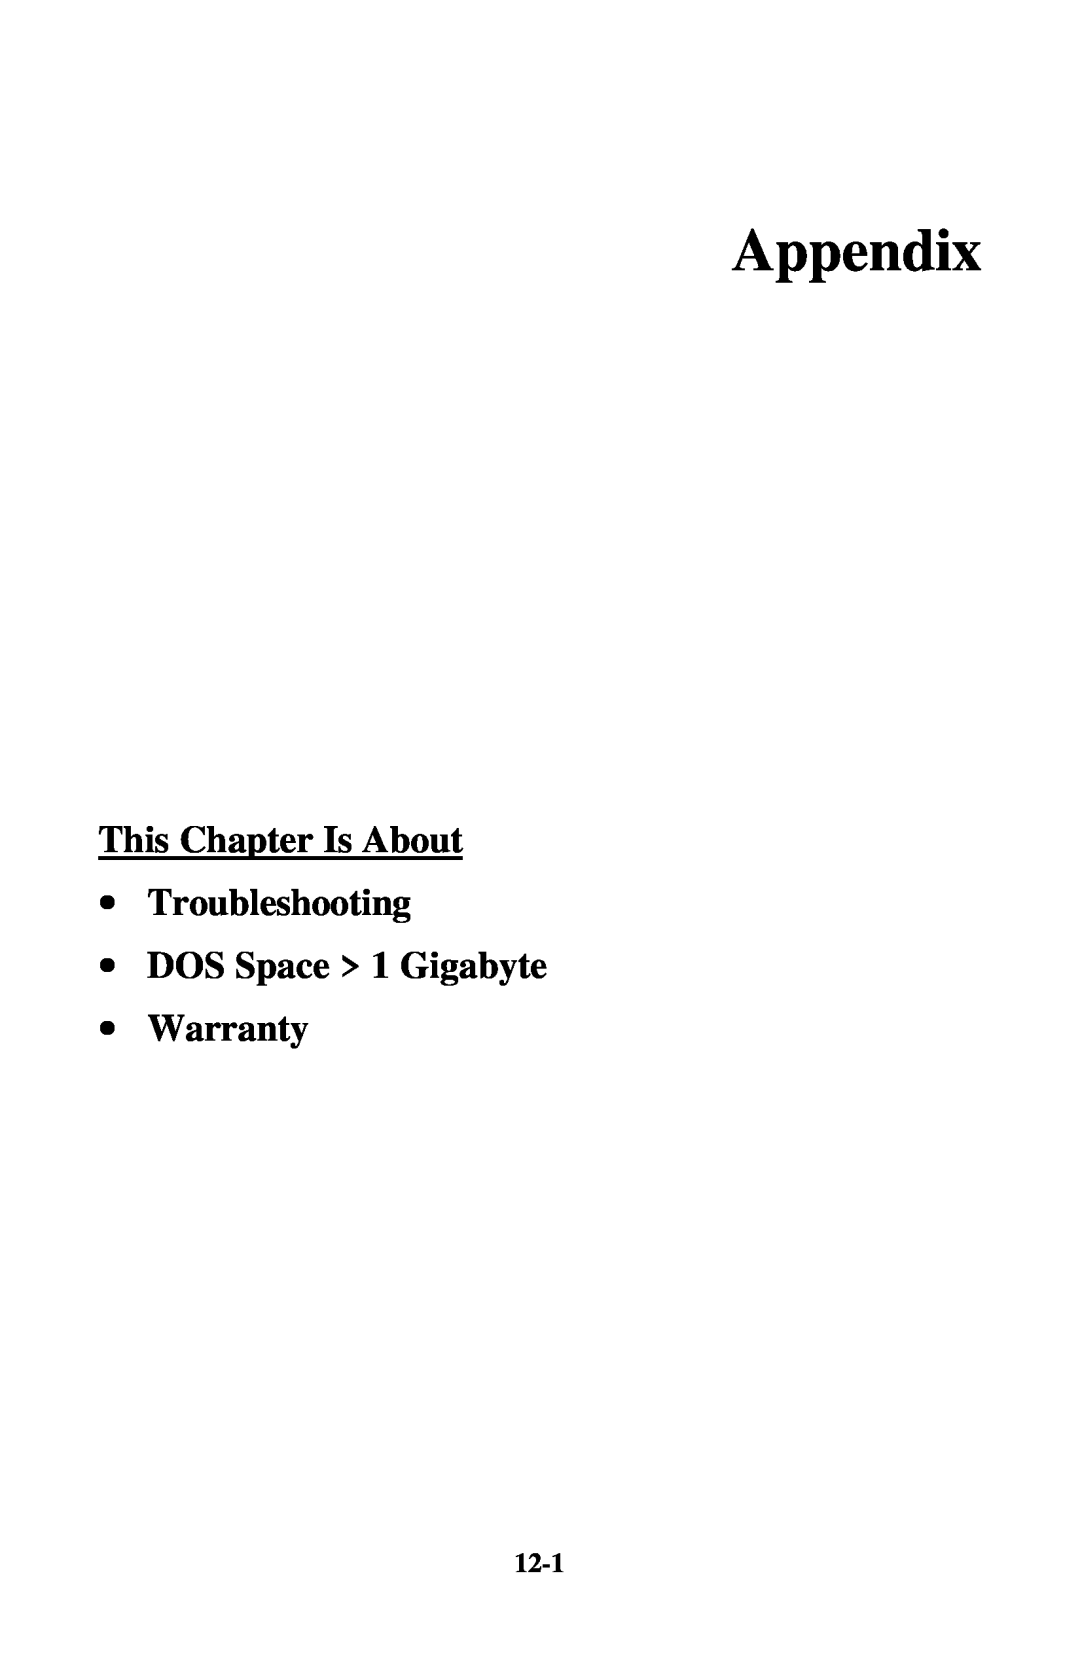 Initio INI-9100UW user manual Appendix, This Chapter Is About ∙ Troubleshooting ∙ DOS Space 1 Gigabyte, ∙ Warranty, 12-1 